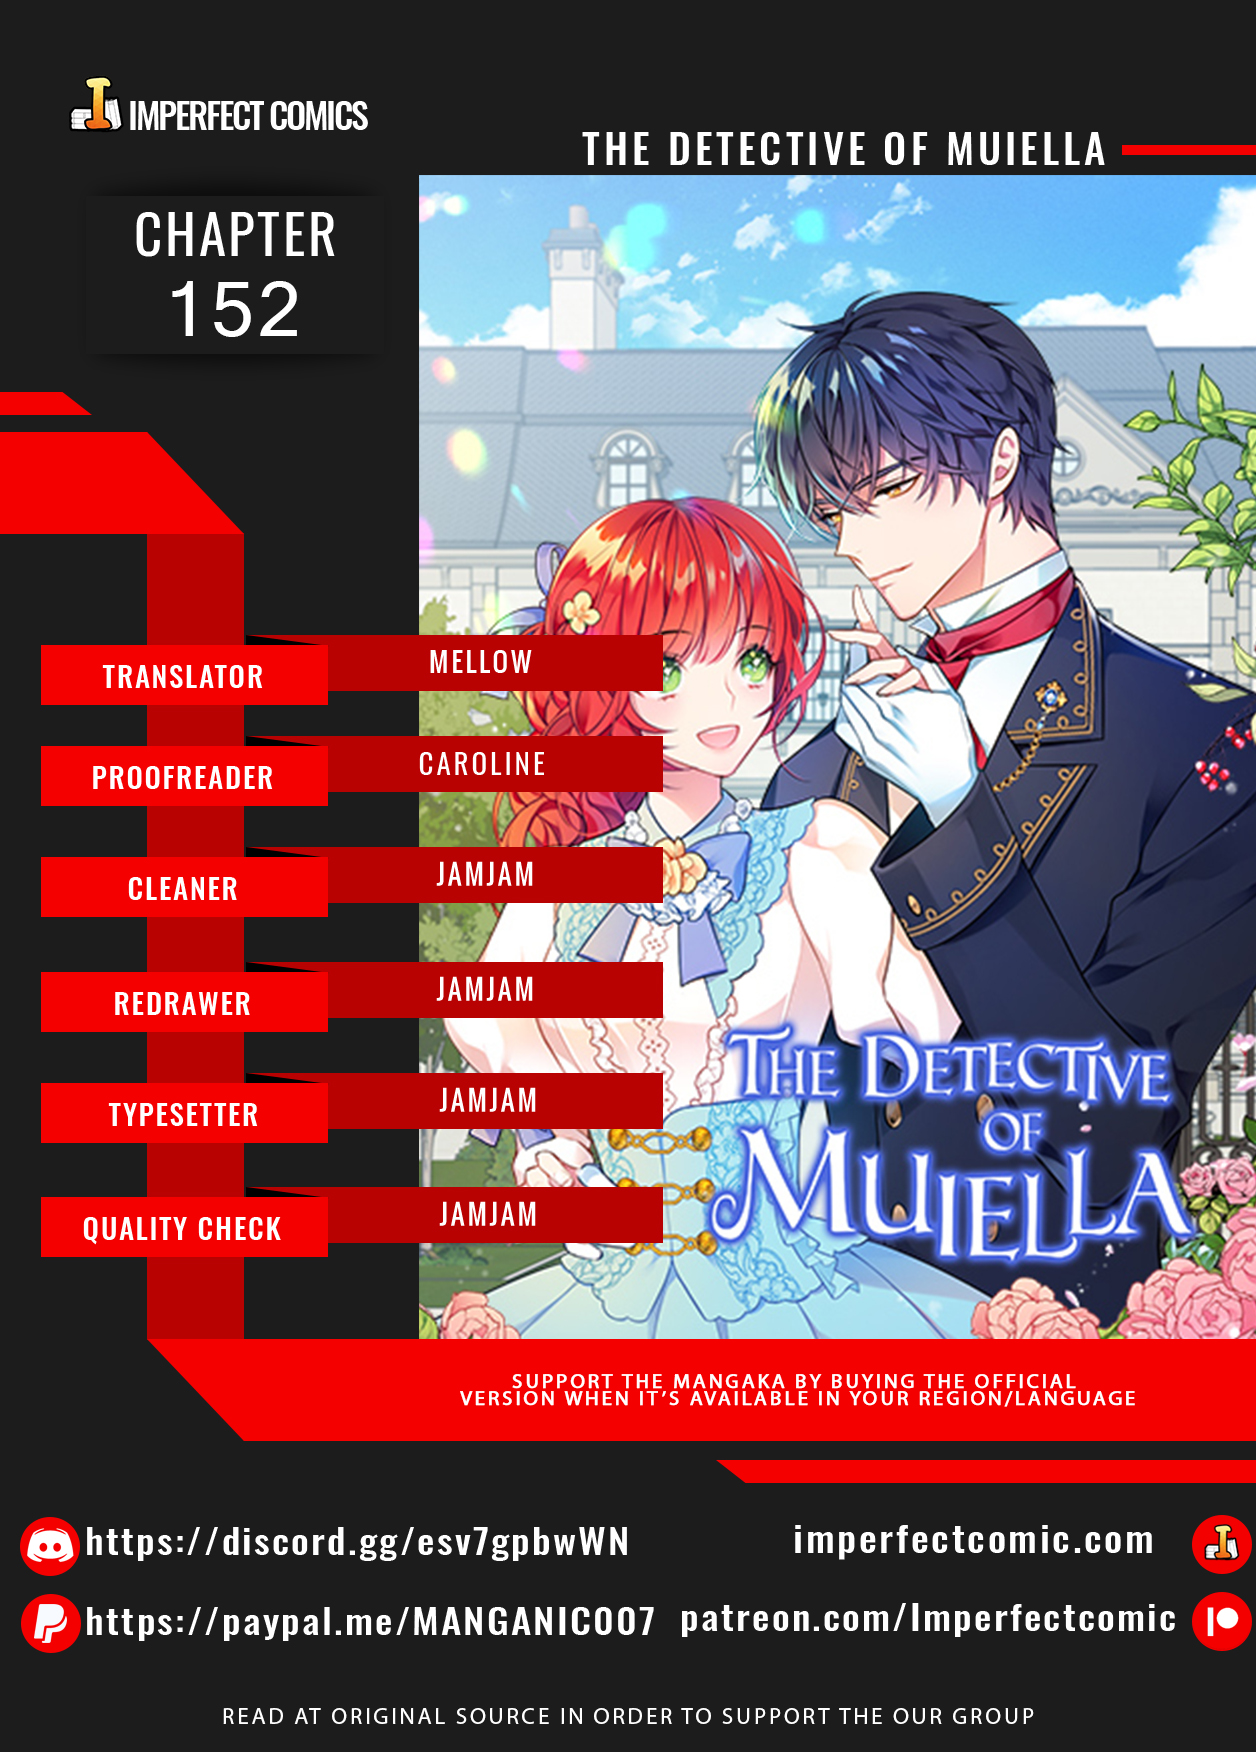 The Detective Of Muiella Chapter 152